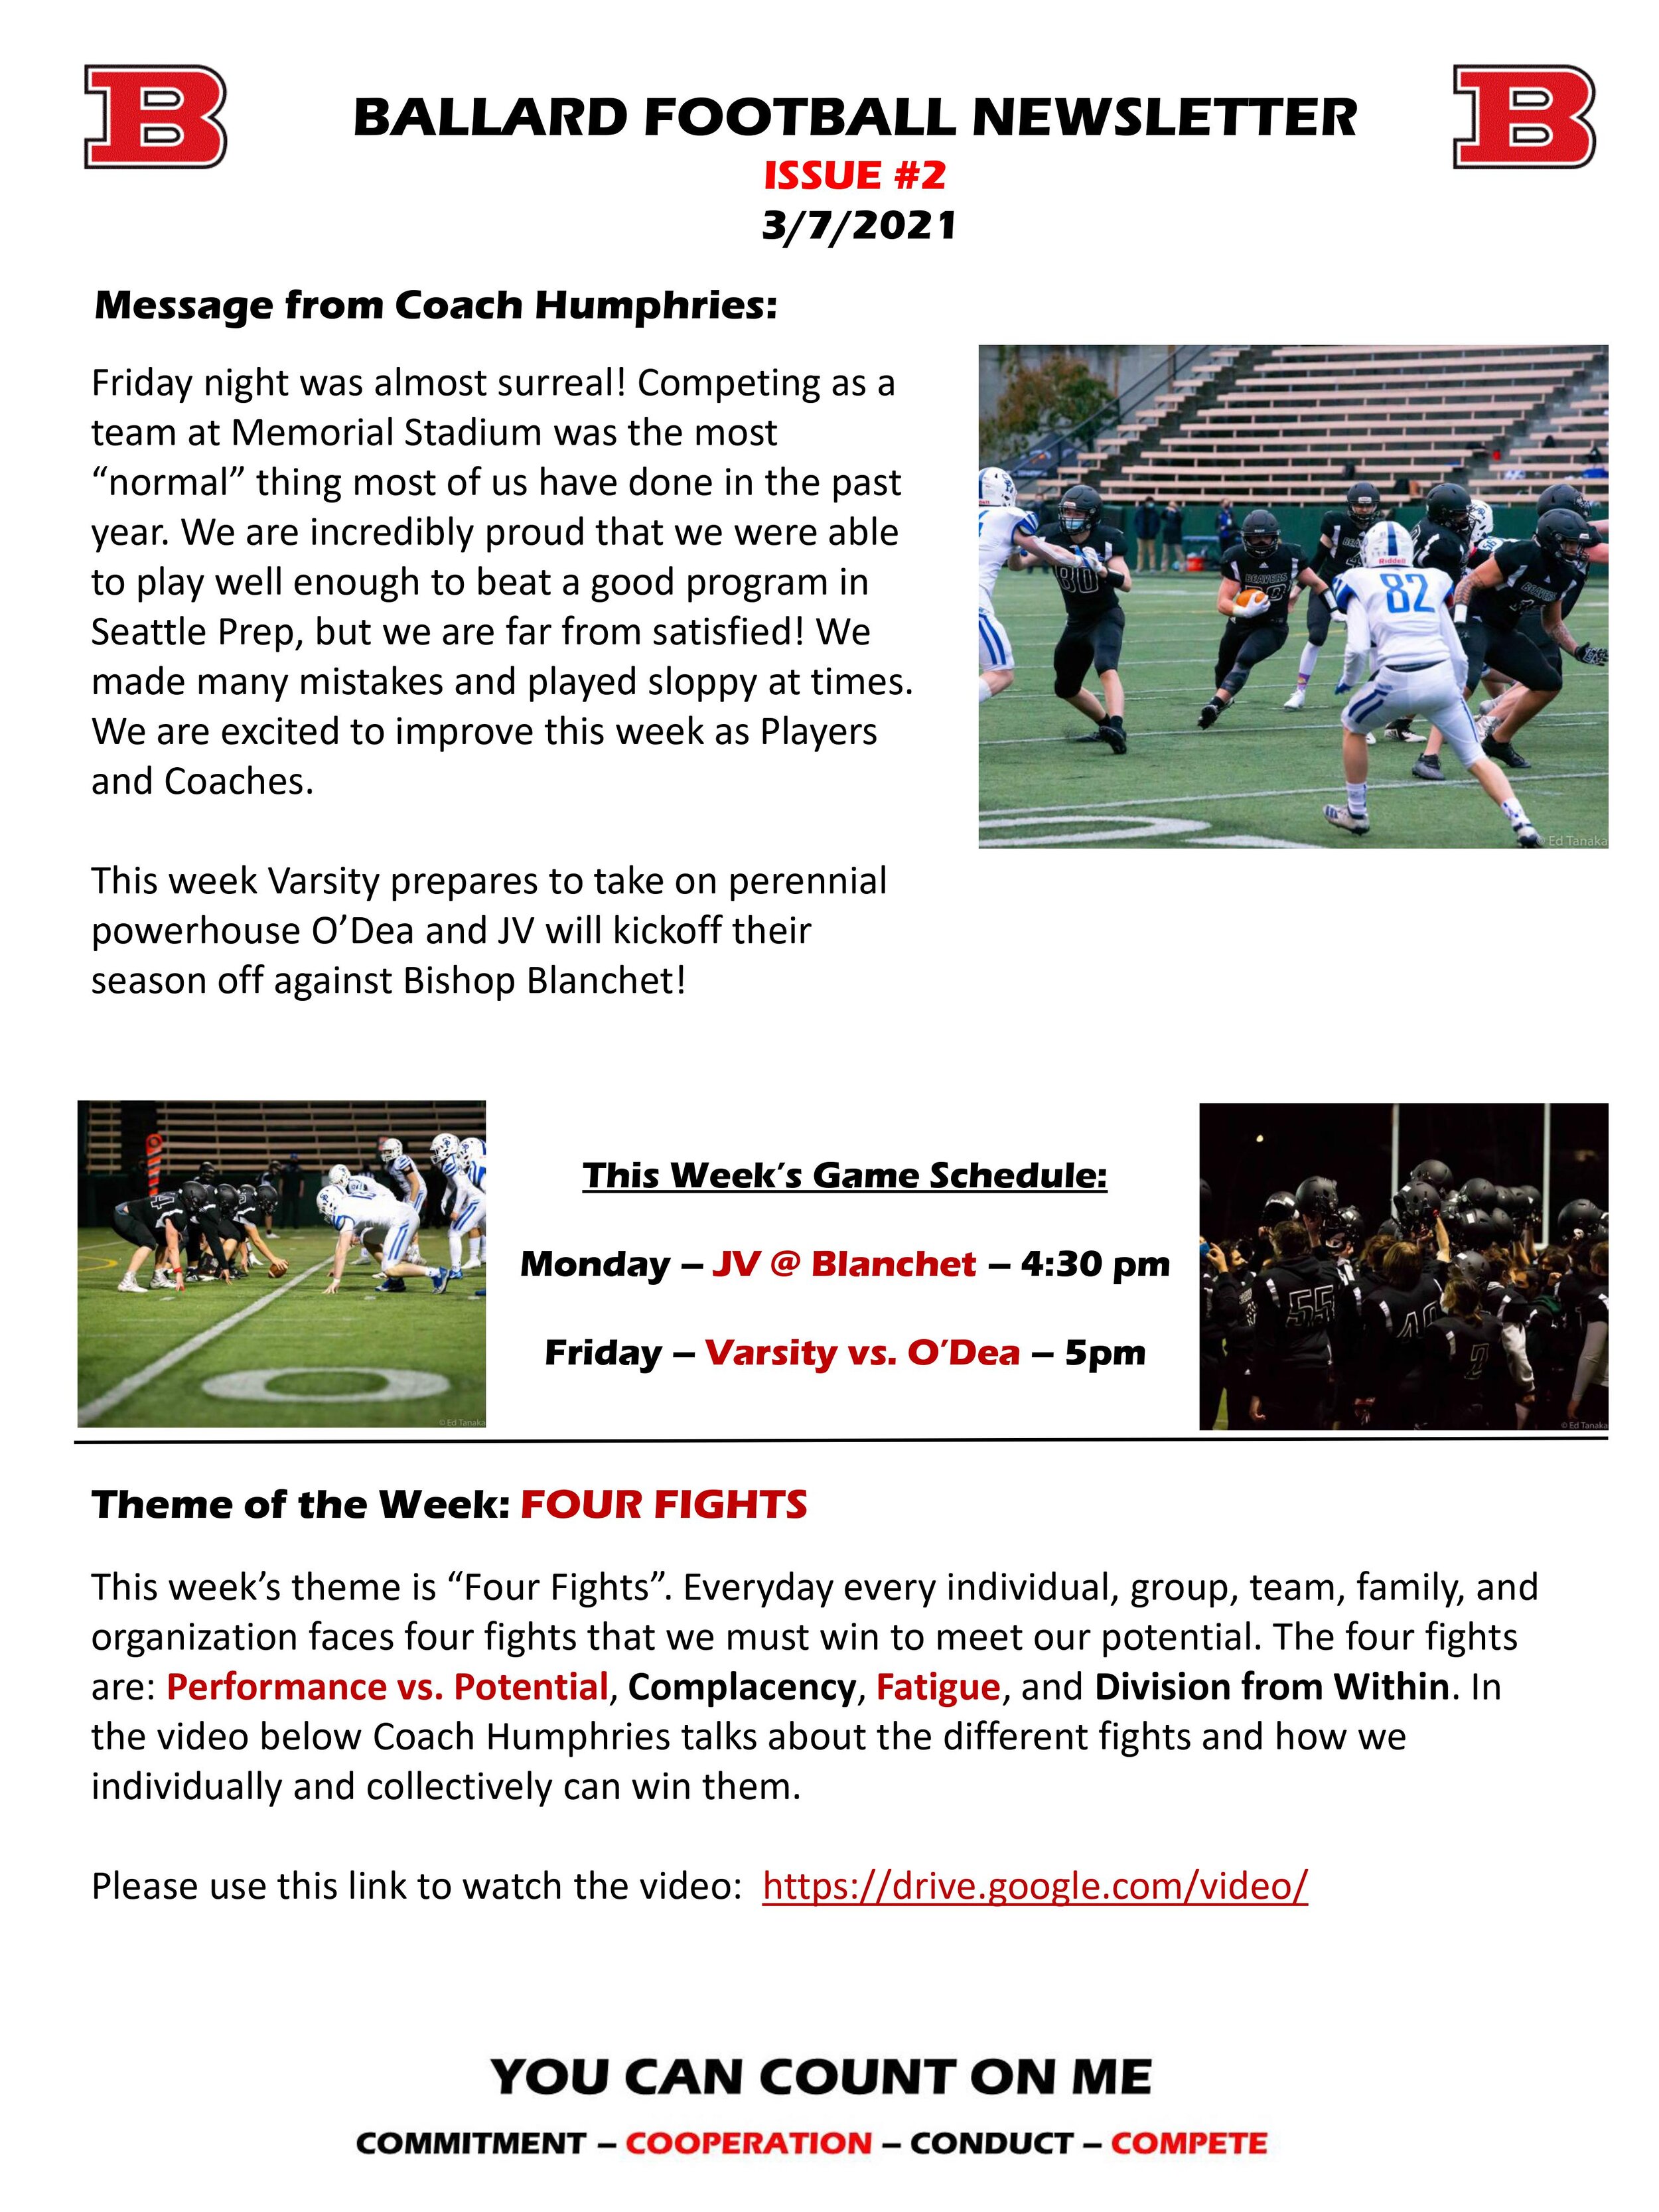 Football Sends Out Weekly Newsletter